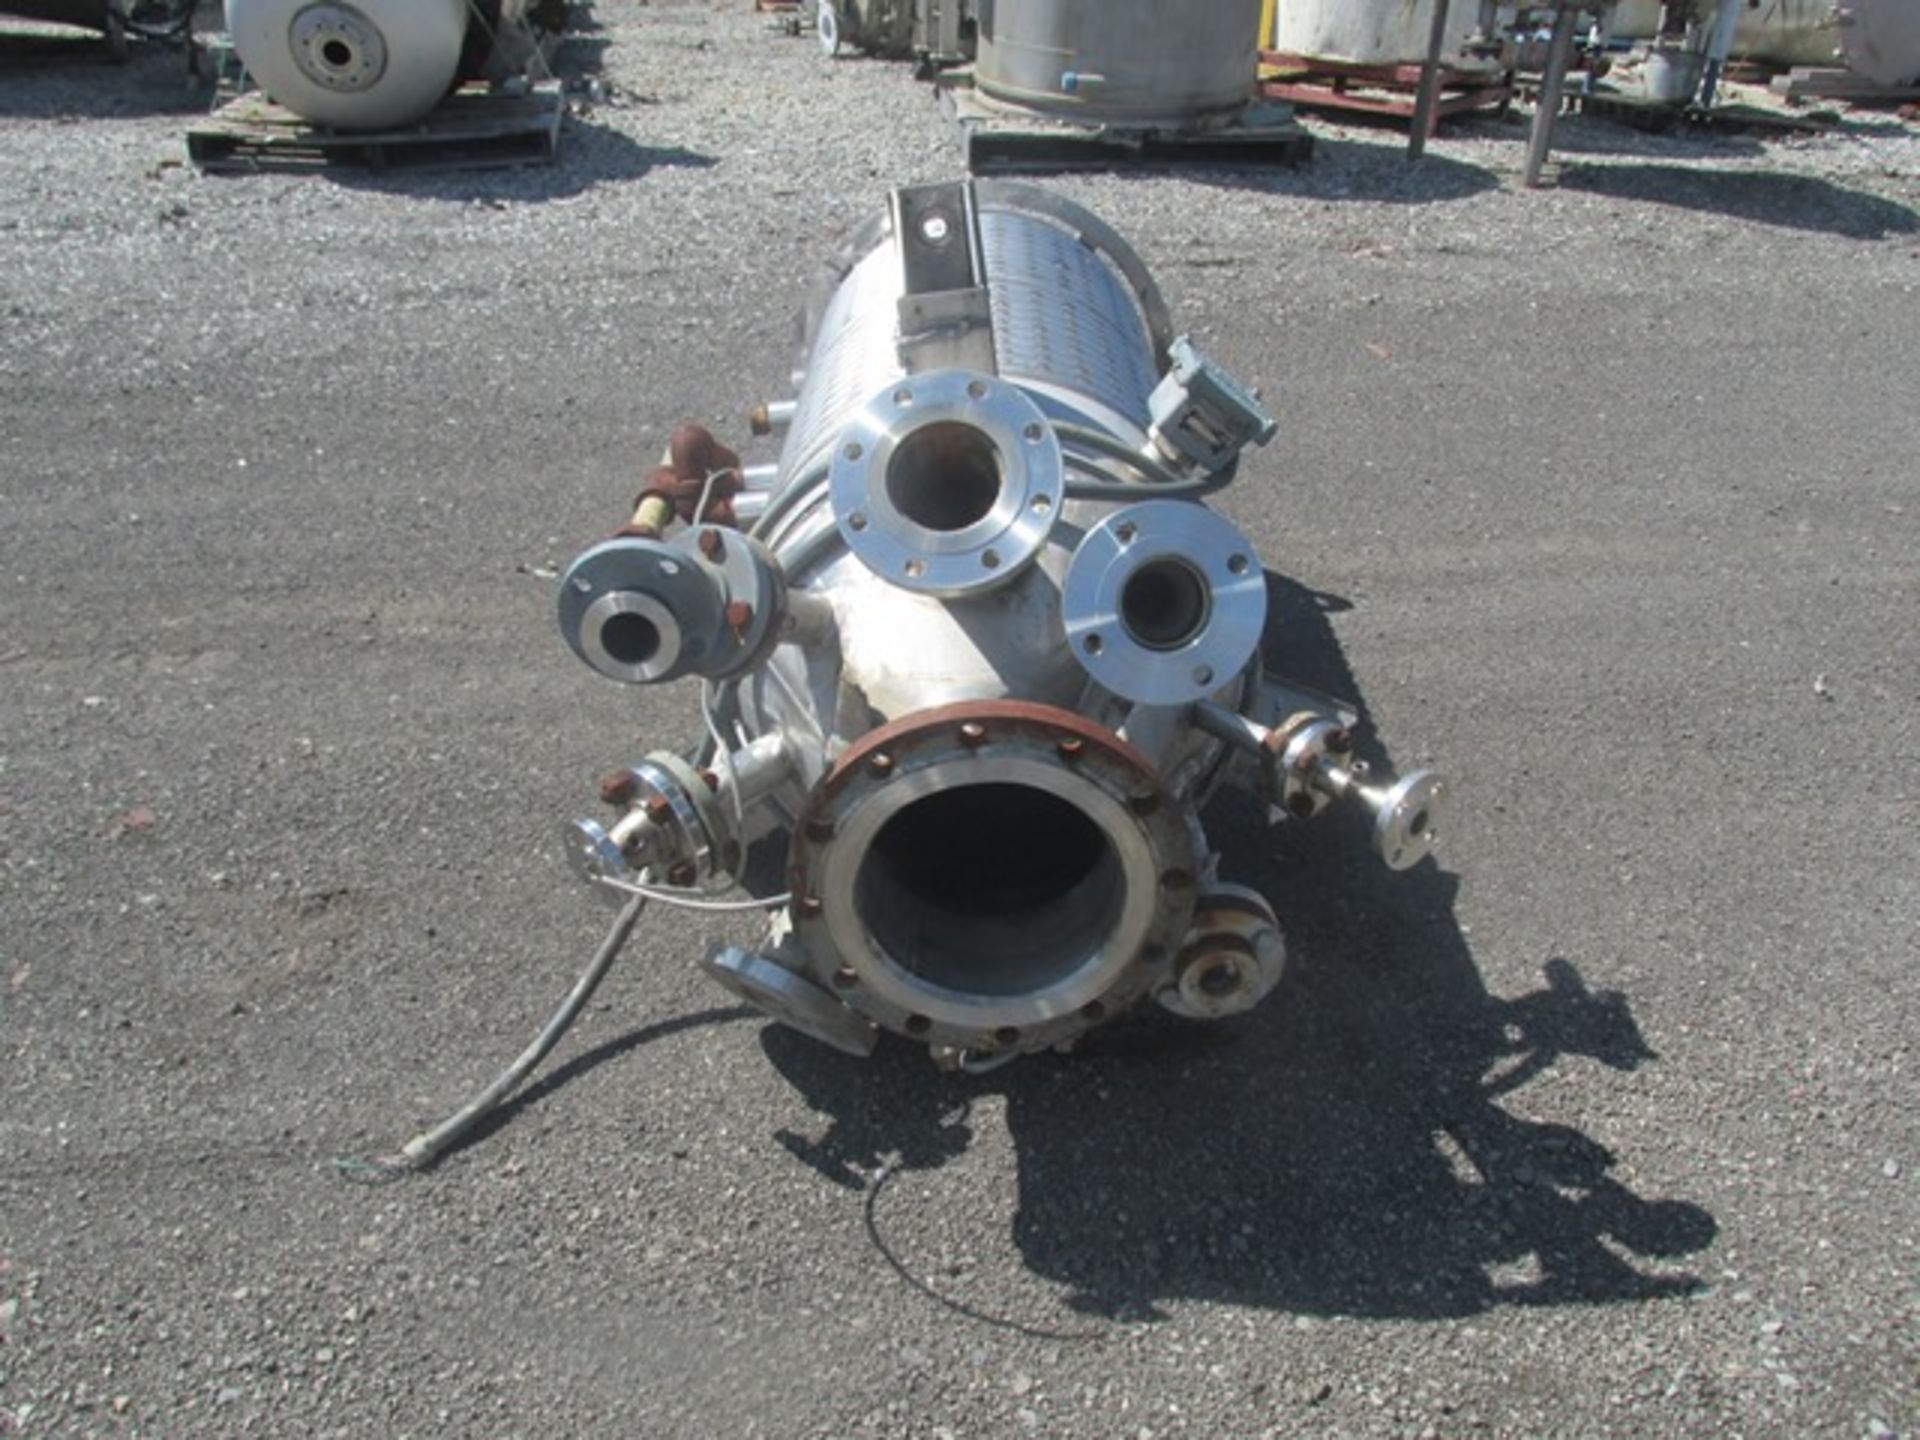 100 gallon Tolan reactor body, stainless steel construction,approx. 24" diameter x 48" straight side - Image 4 of 9